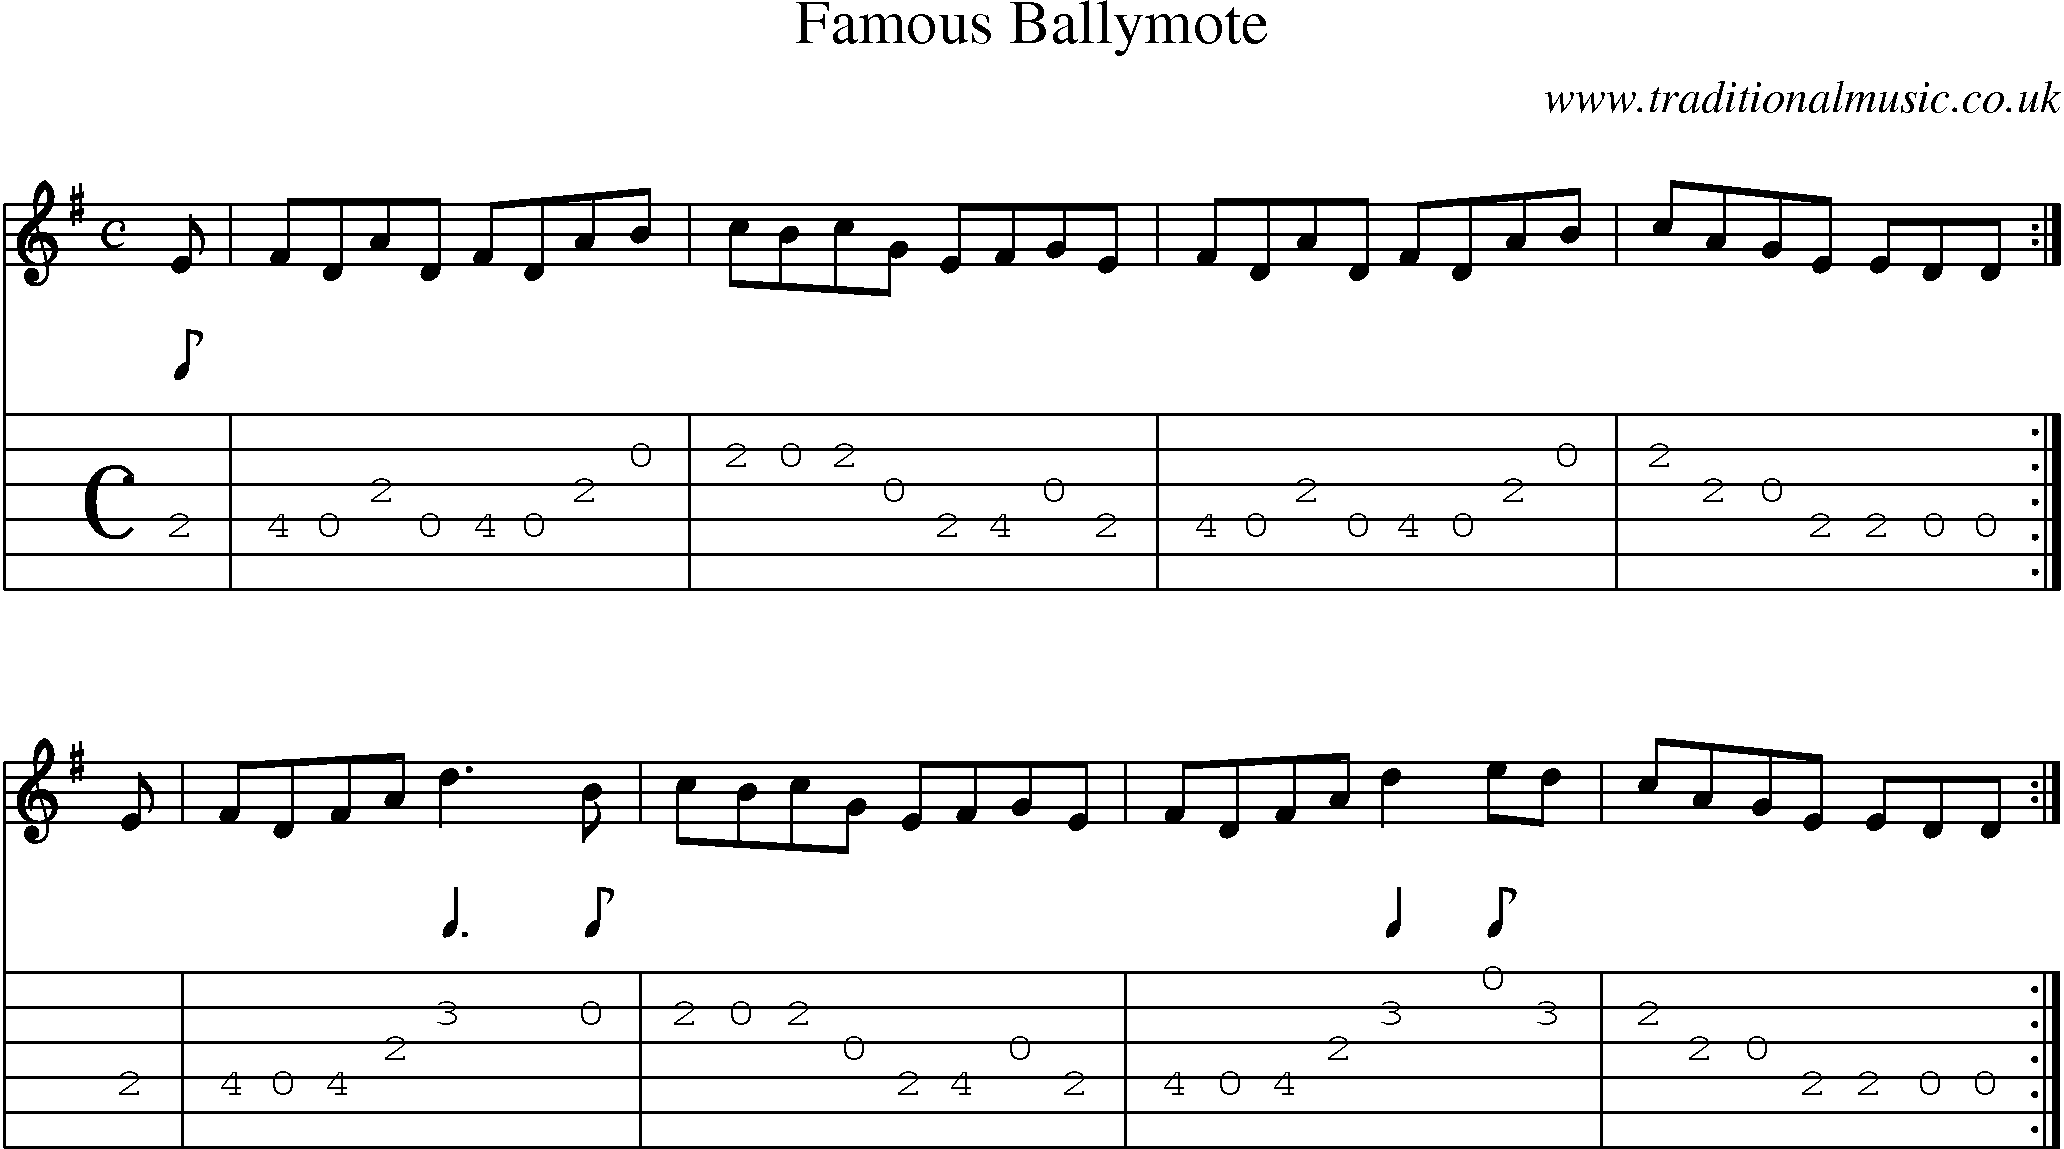 Music Score and Guitar Tabs for Famous Ballymote